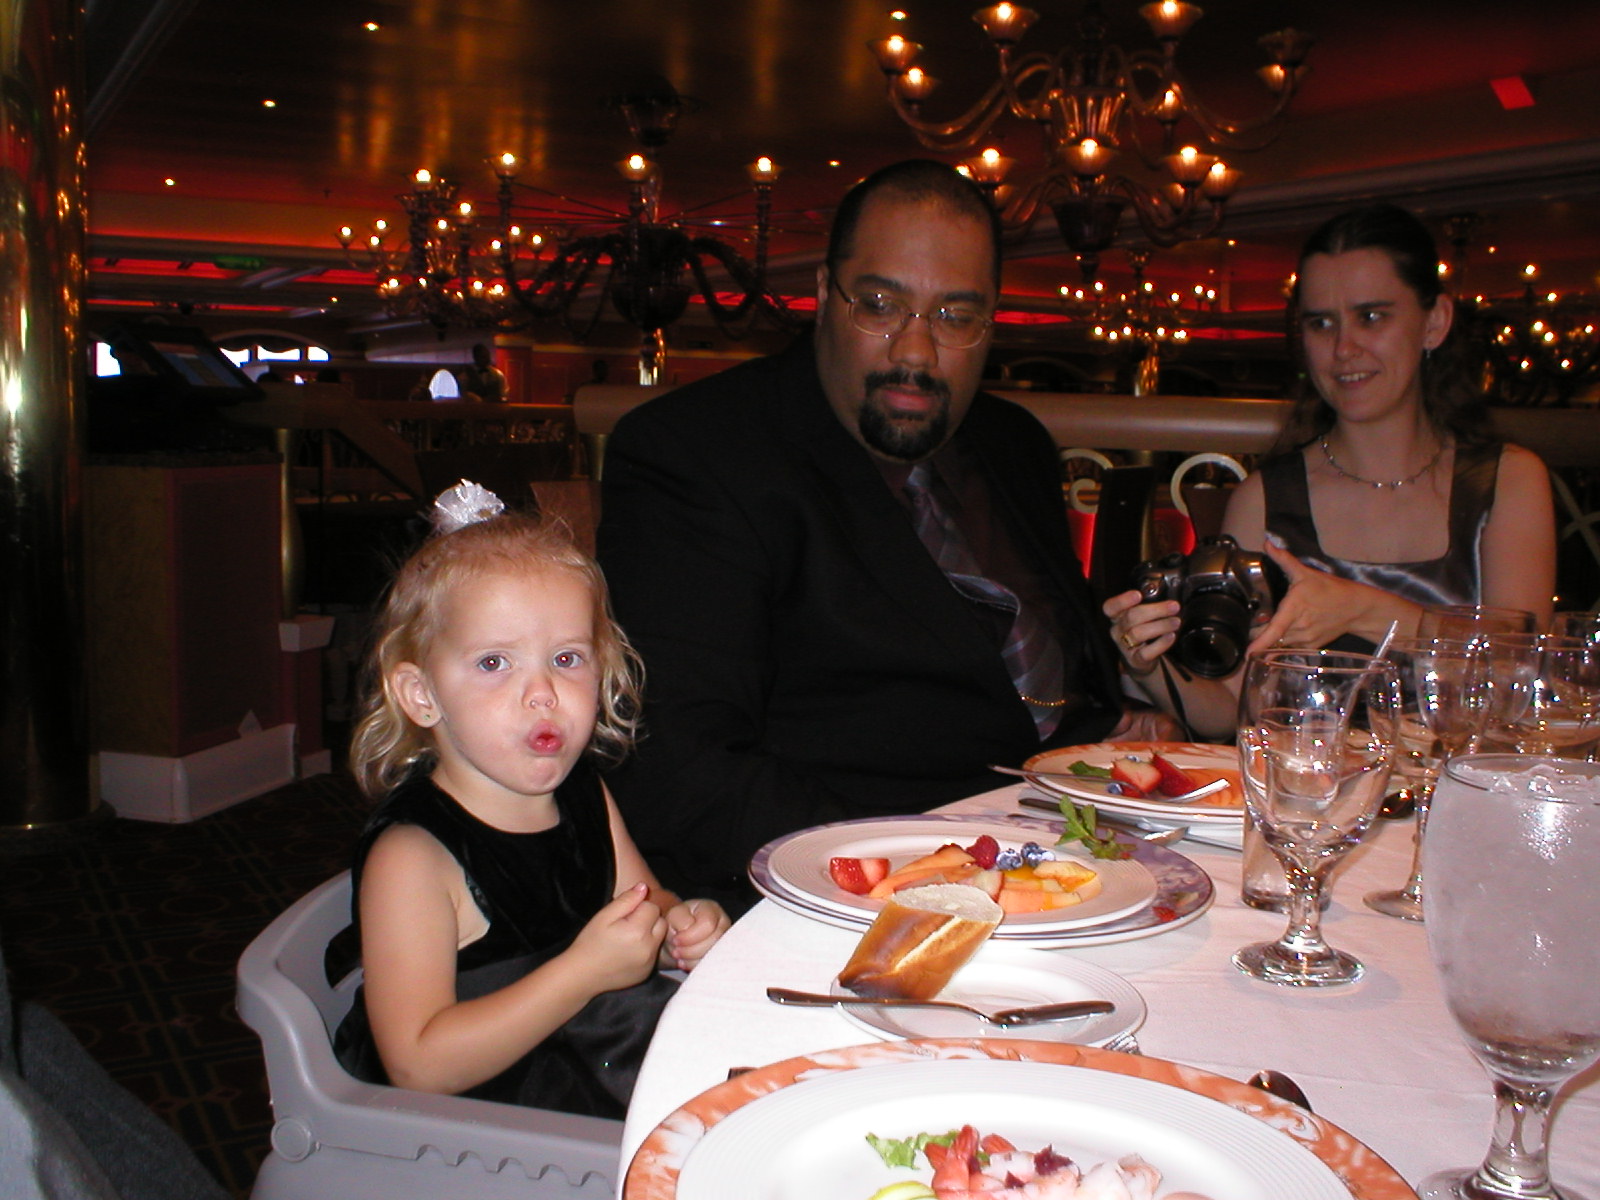 Kaylin stuffing her face at formal night... with onlookers.